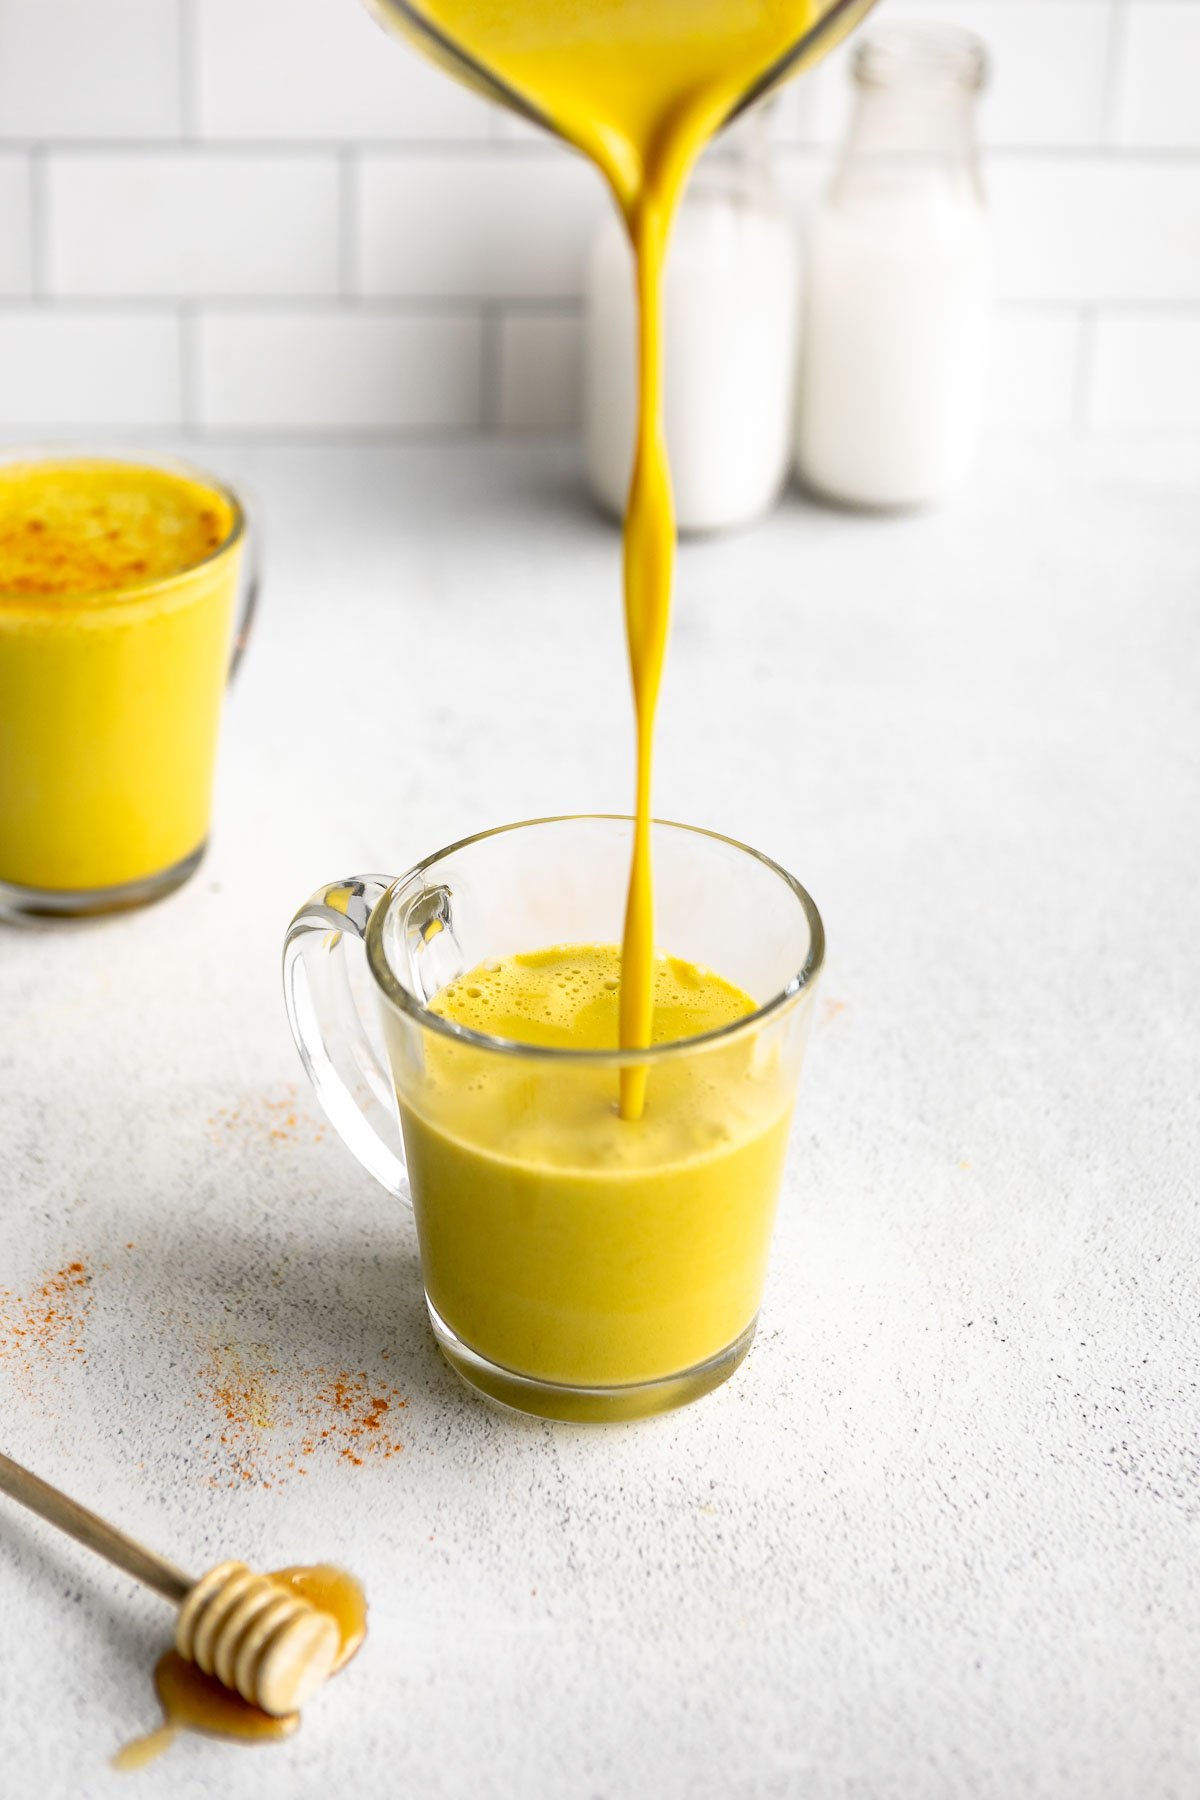 pouring the golden milk turmeric latte in a glass mug